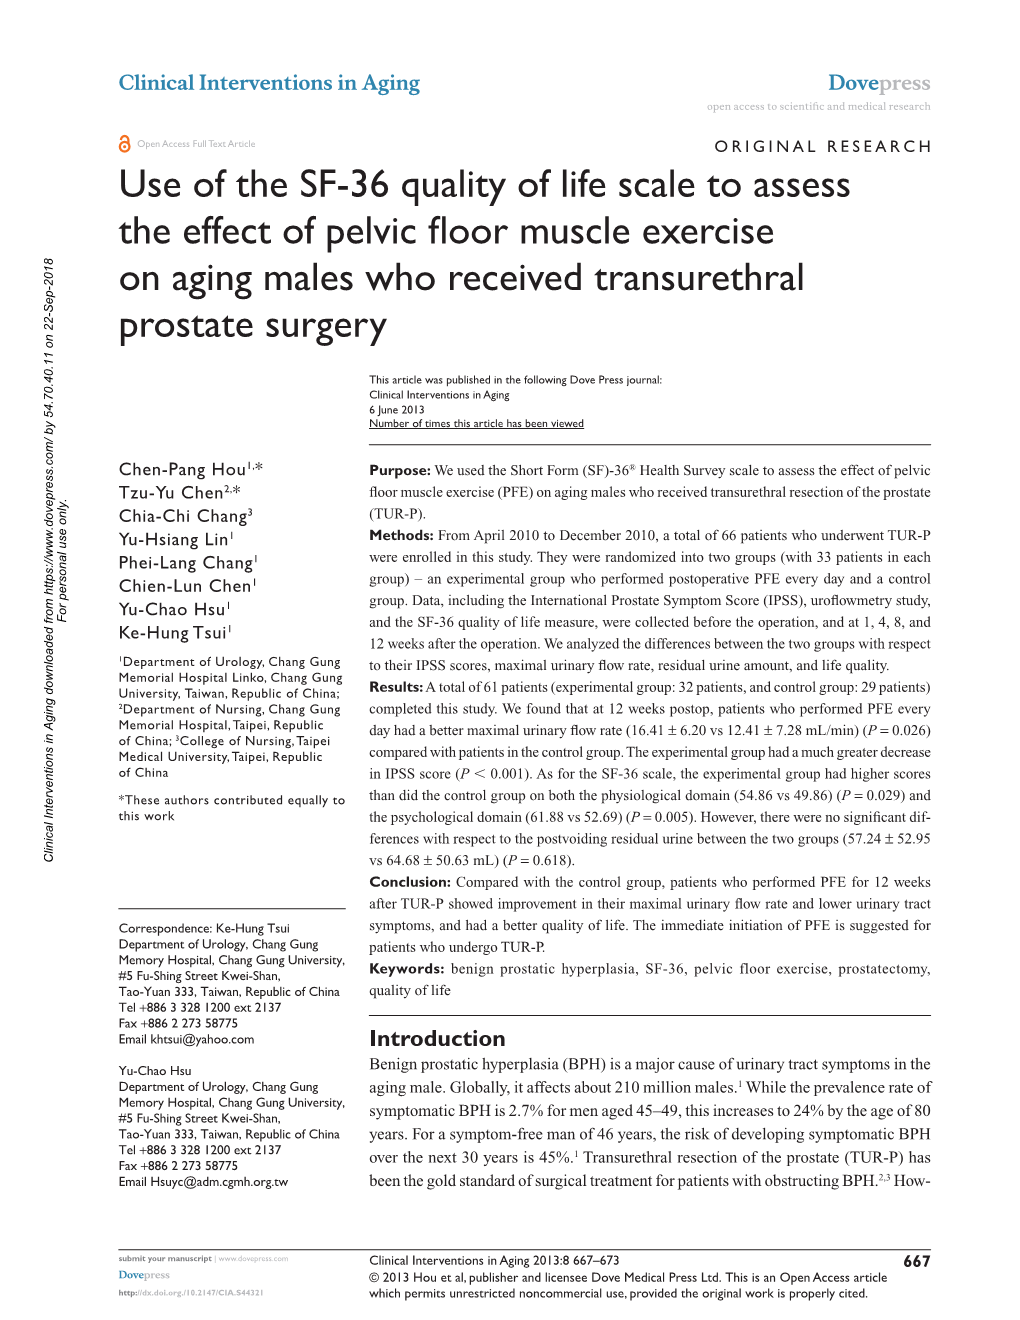 Use of the SF-36 Quality of Life Scale to Assess the Effect of Pelvic Floor Muscle Exercise on Aging Males Who Received Transurethral Prostate Surgery